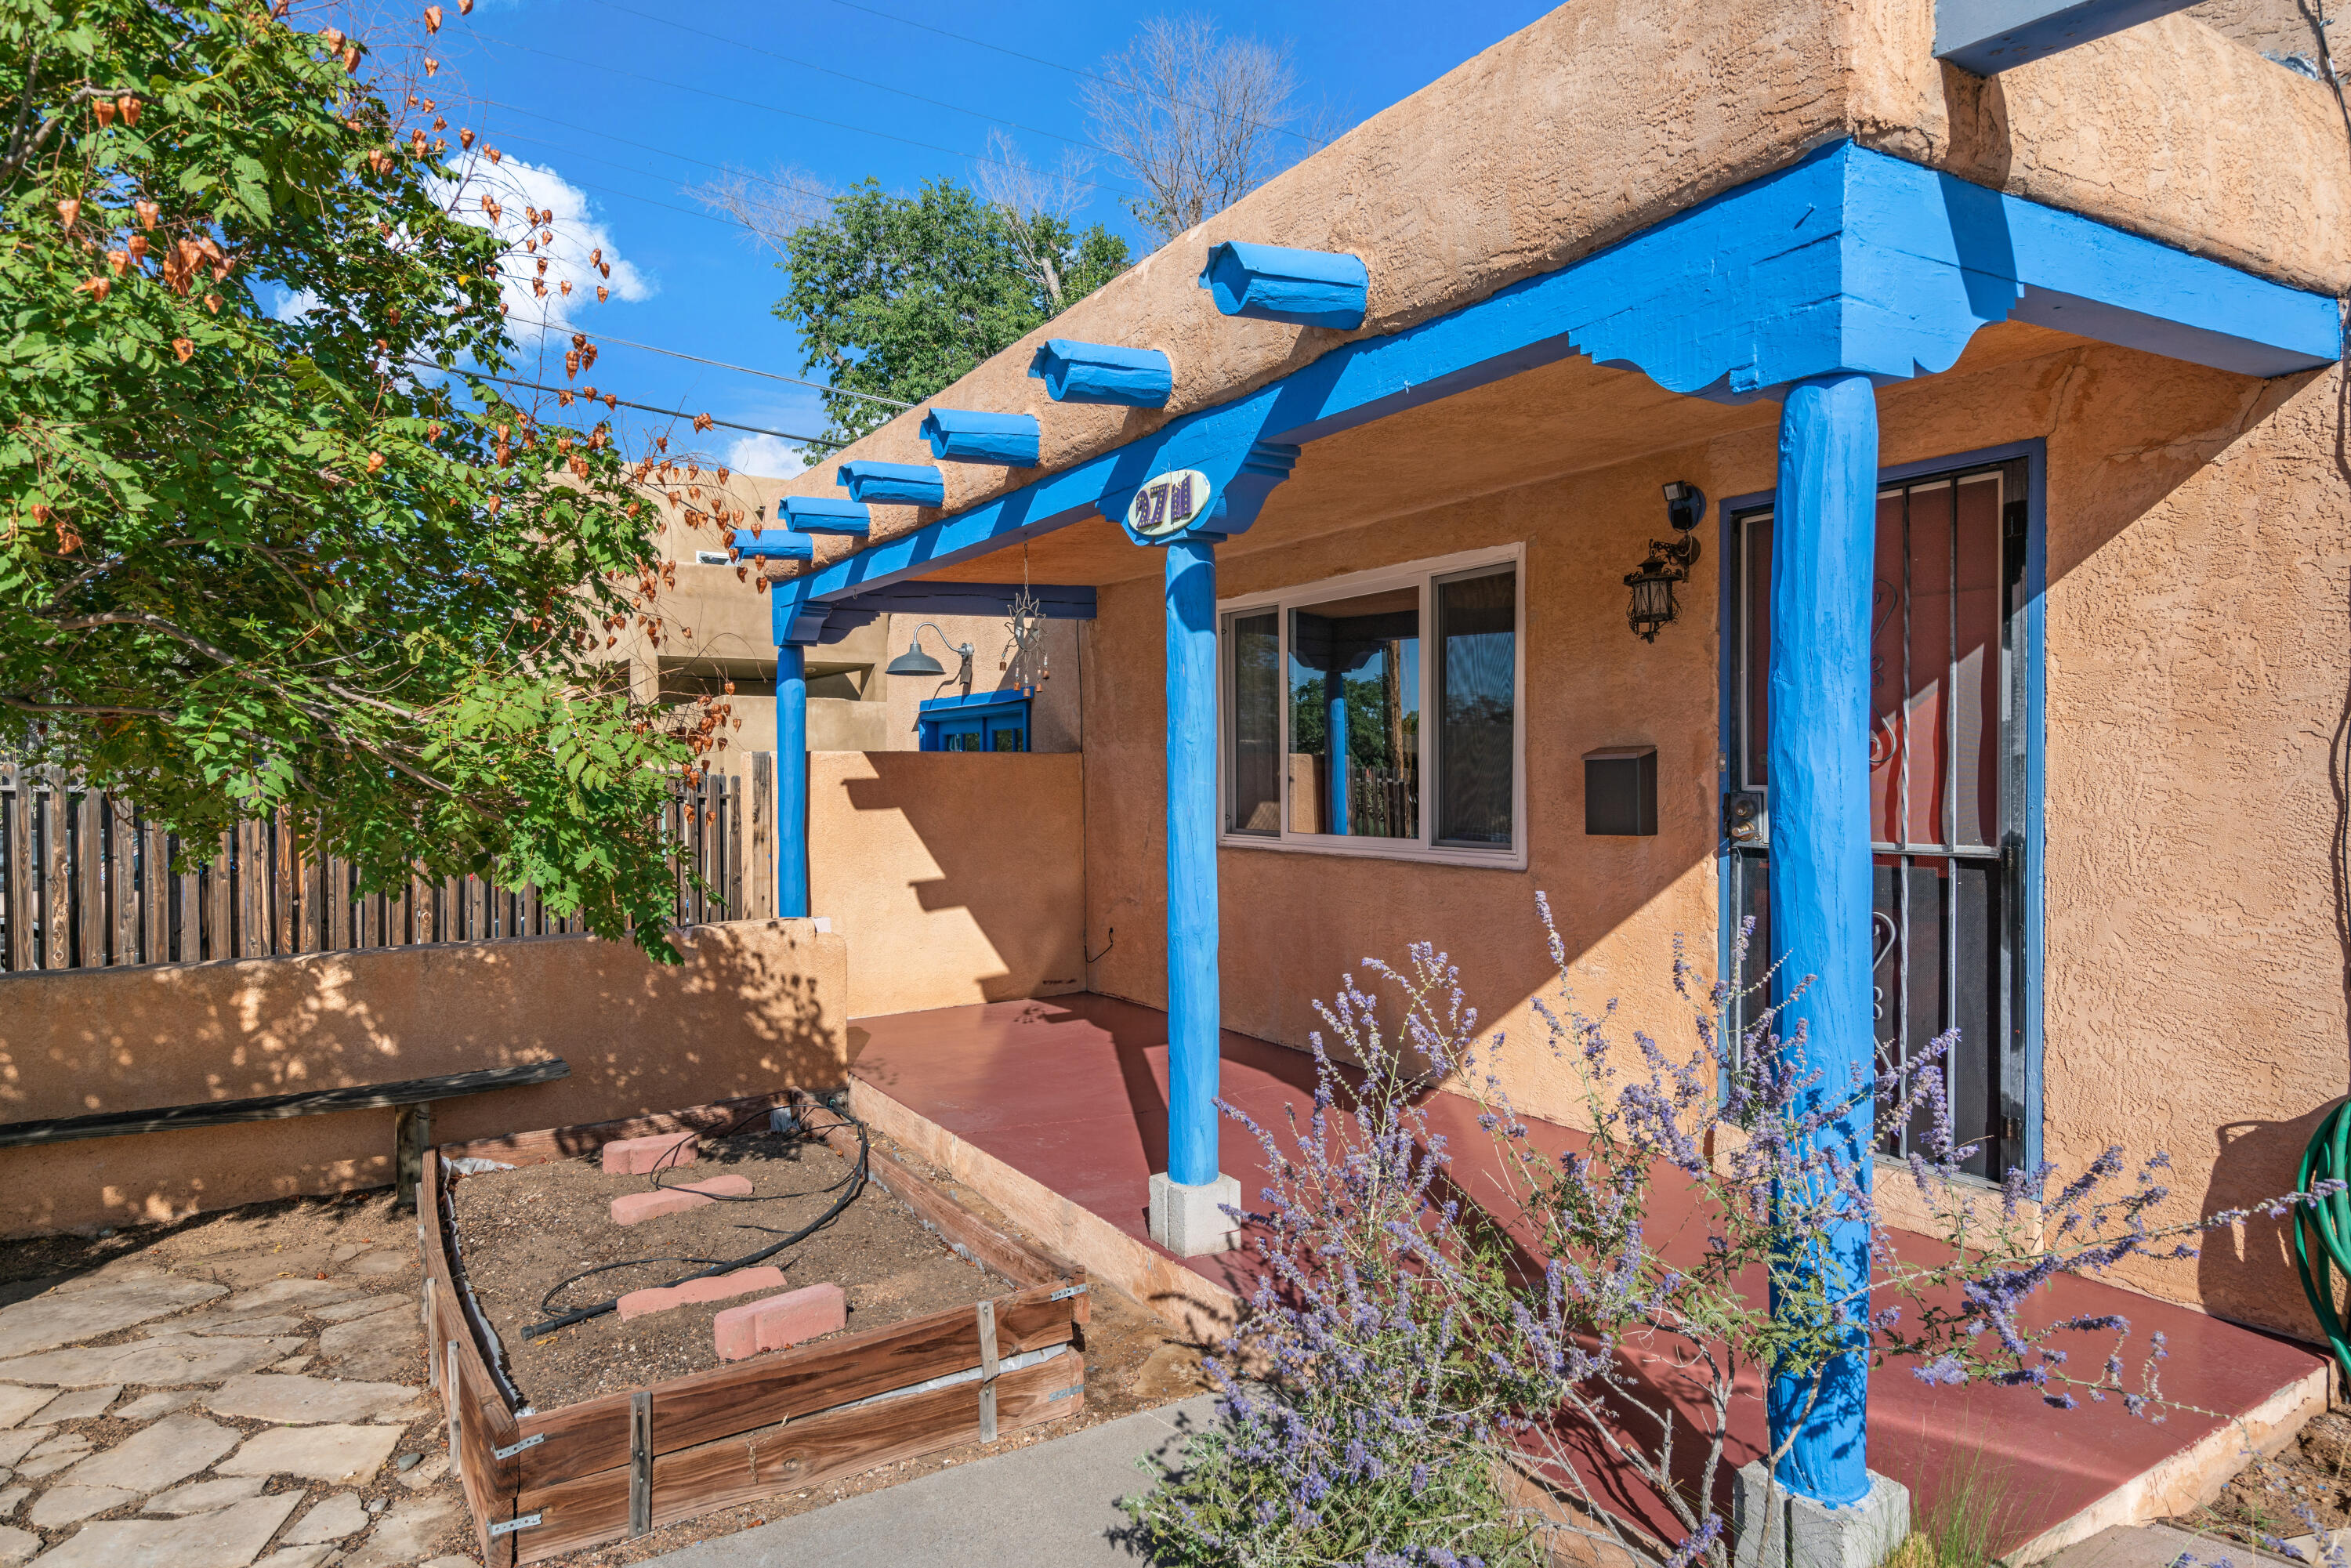 This South UNM pueblo style home is move in ready! This home is in walking distance to UNM, CNM, Nob Hill and Albuquerque's 3 entertainment stadiums. This homes unique style has charm that fits the neighborhood it hangs out in. It is a 3 bedroom/possible 4 with 2 baths. The possible 4th can be an office for the remote work types, an art studio for the artist, or both. The back dinning room has big windows looking out to the back yard letting in a ton of natural light. In the winter you can stay warm with not just 1 but 2 fireplaces. This home is charming as well as versatile. Make this home yours.